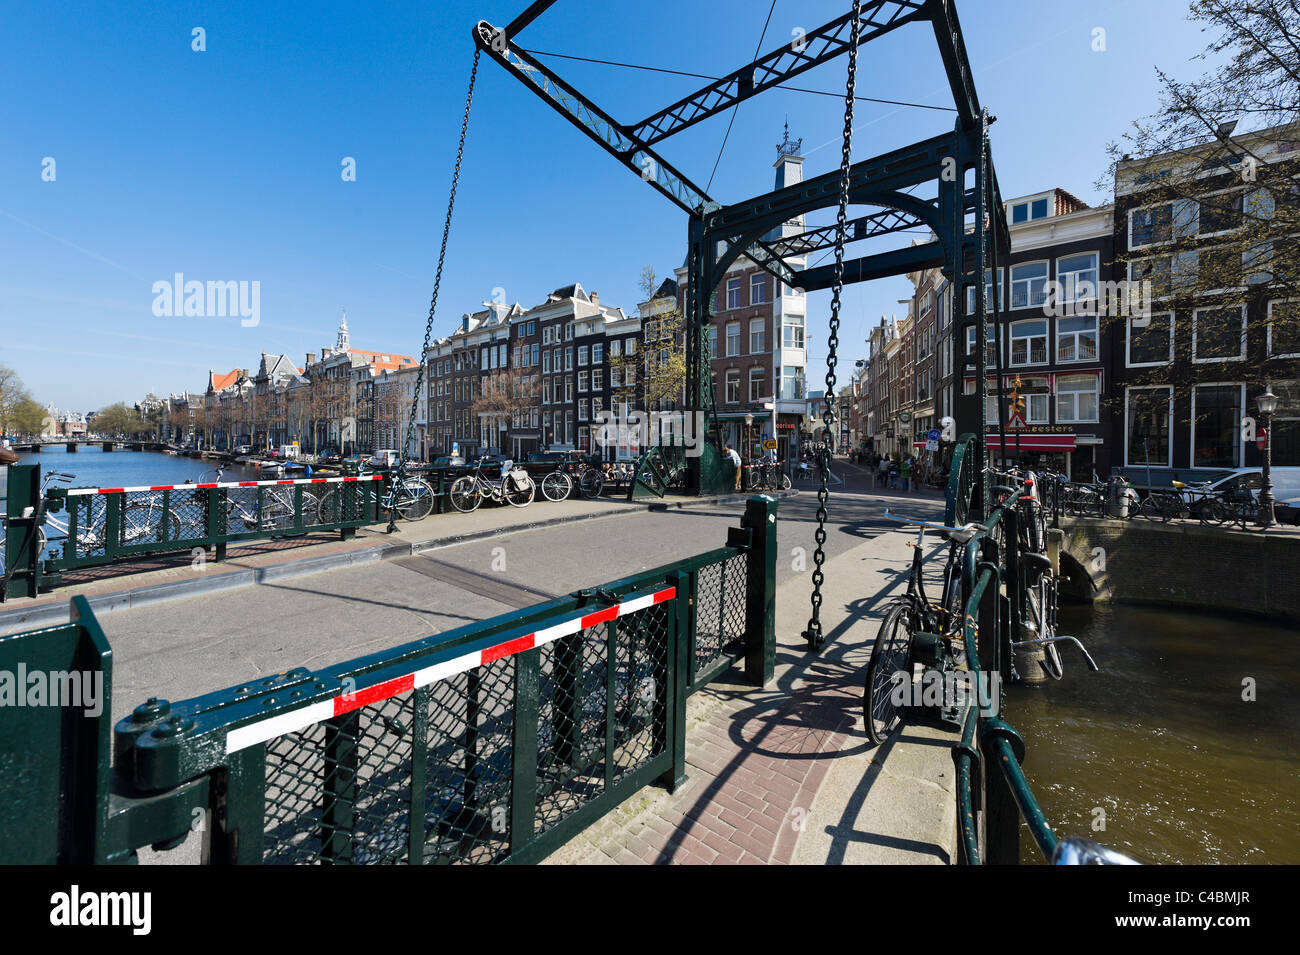 Bridge over the Kloveniersburgwal canal at the end of Staalstraat in the city centre, Amsterdam, Netherlands Stock Photo